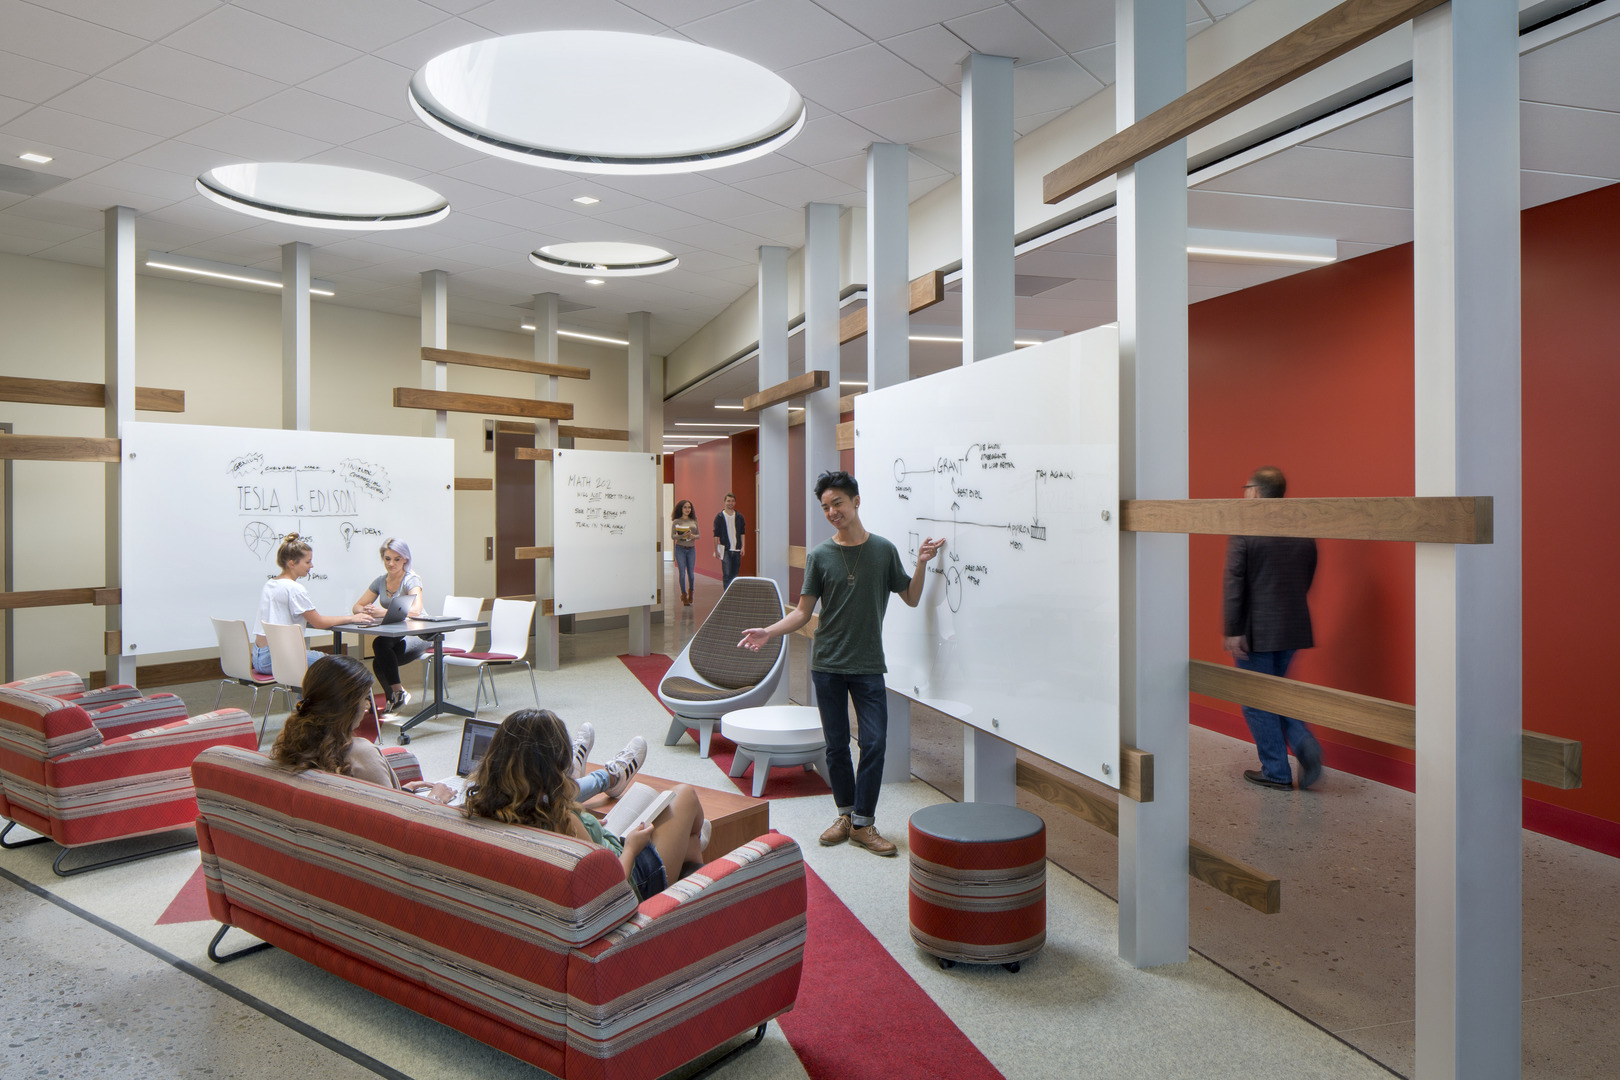 Architecture that encourages social interaction extends to the classroom as well. 